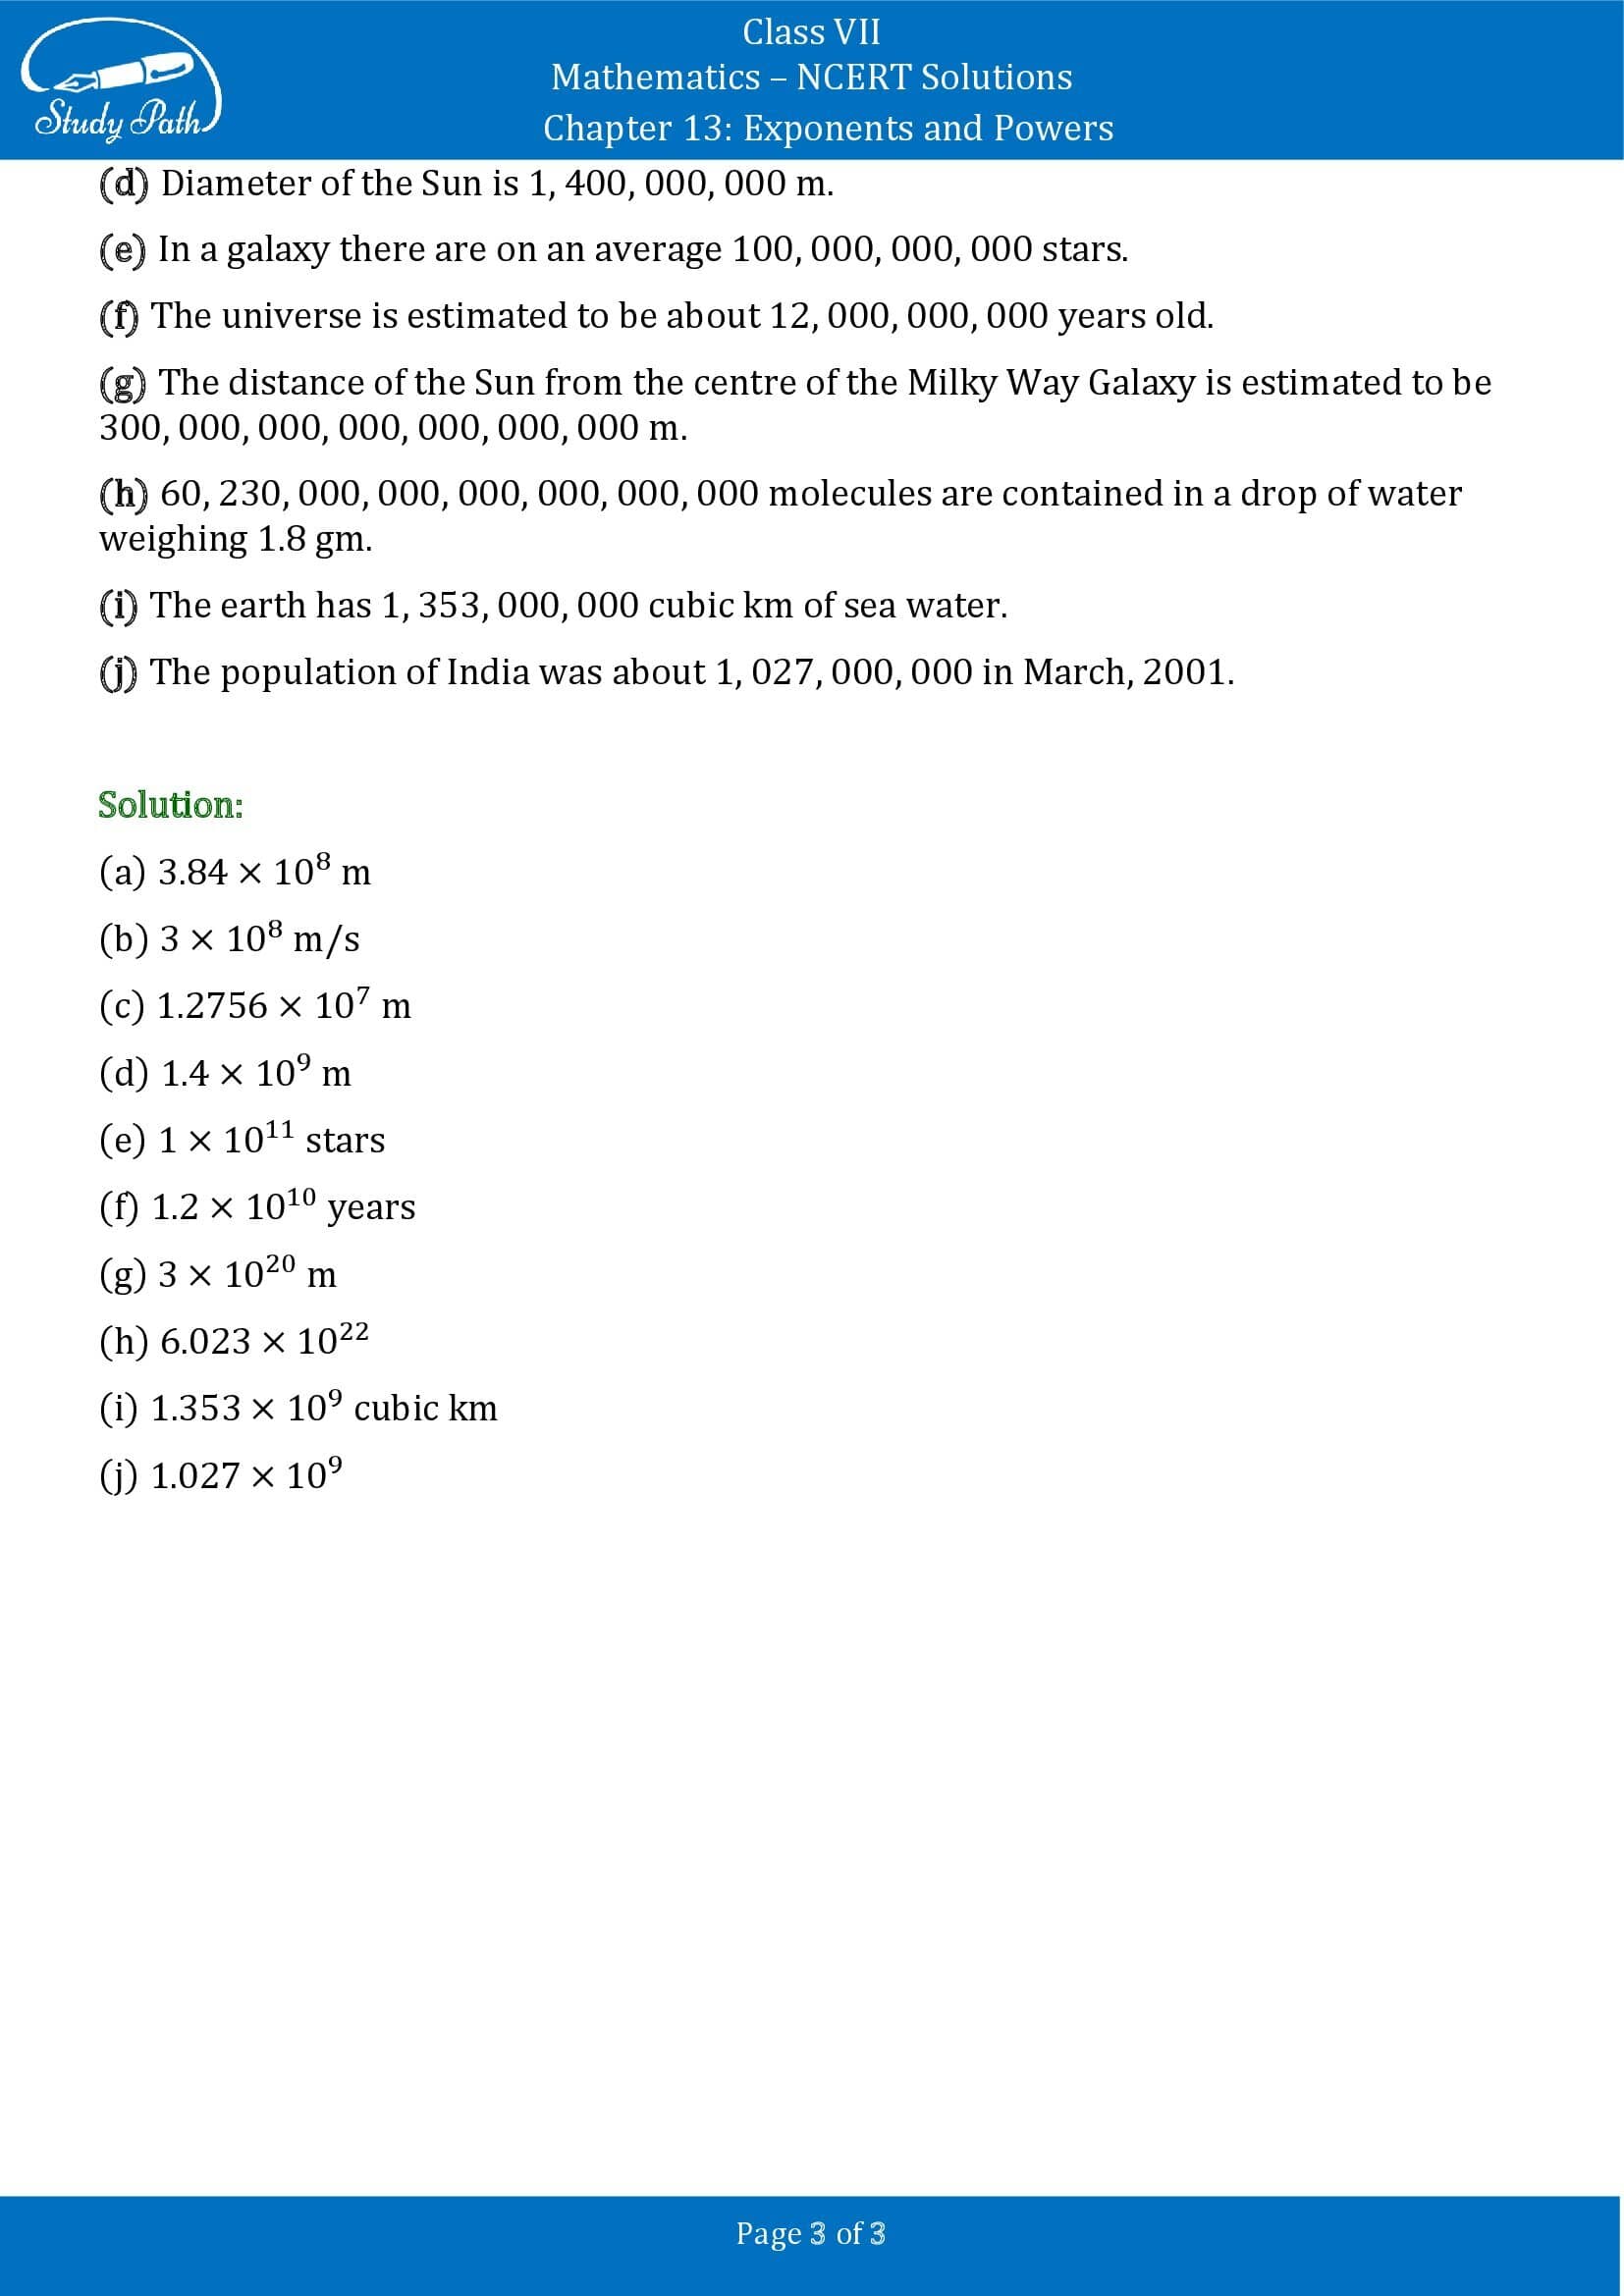 NCERT Solutions for Class 7 Maths Chapter 13 Exponents and Powers Exercise 13.3 00003